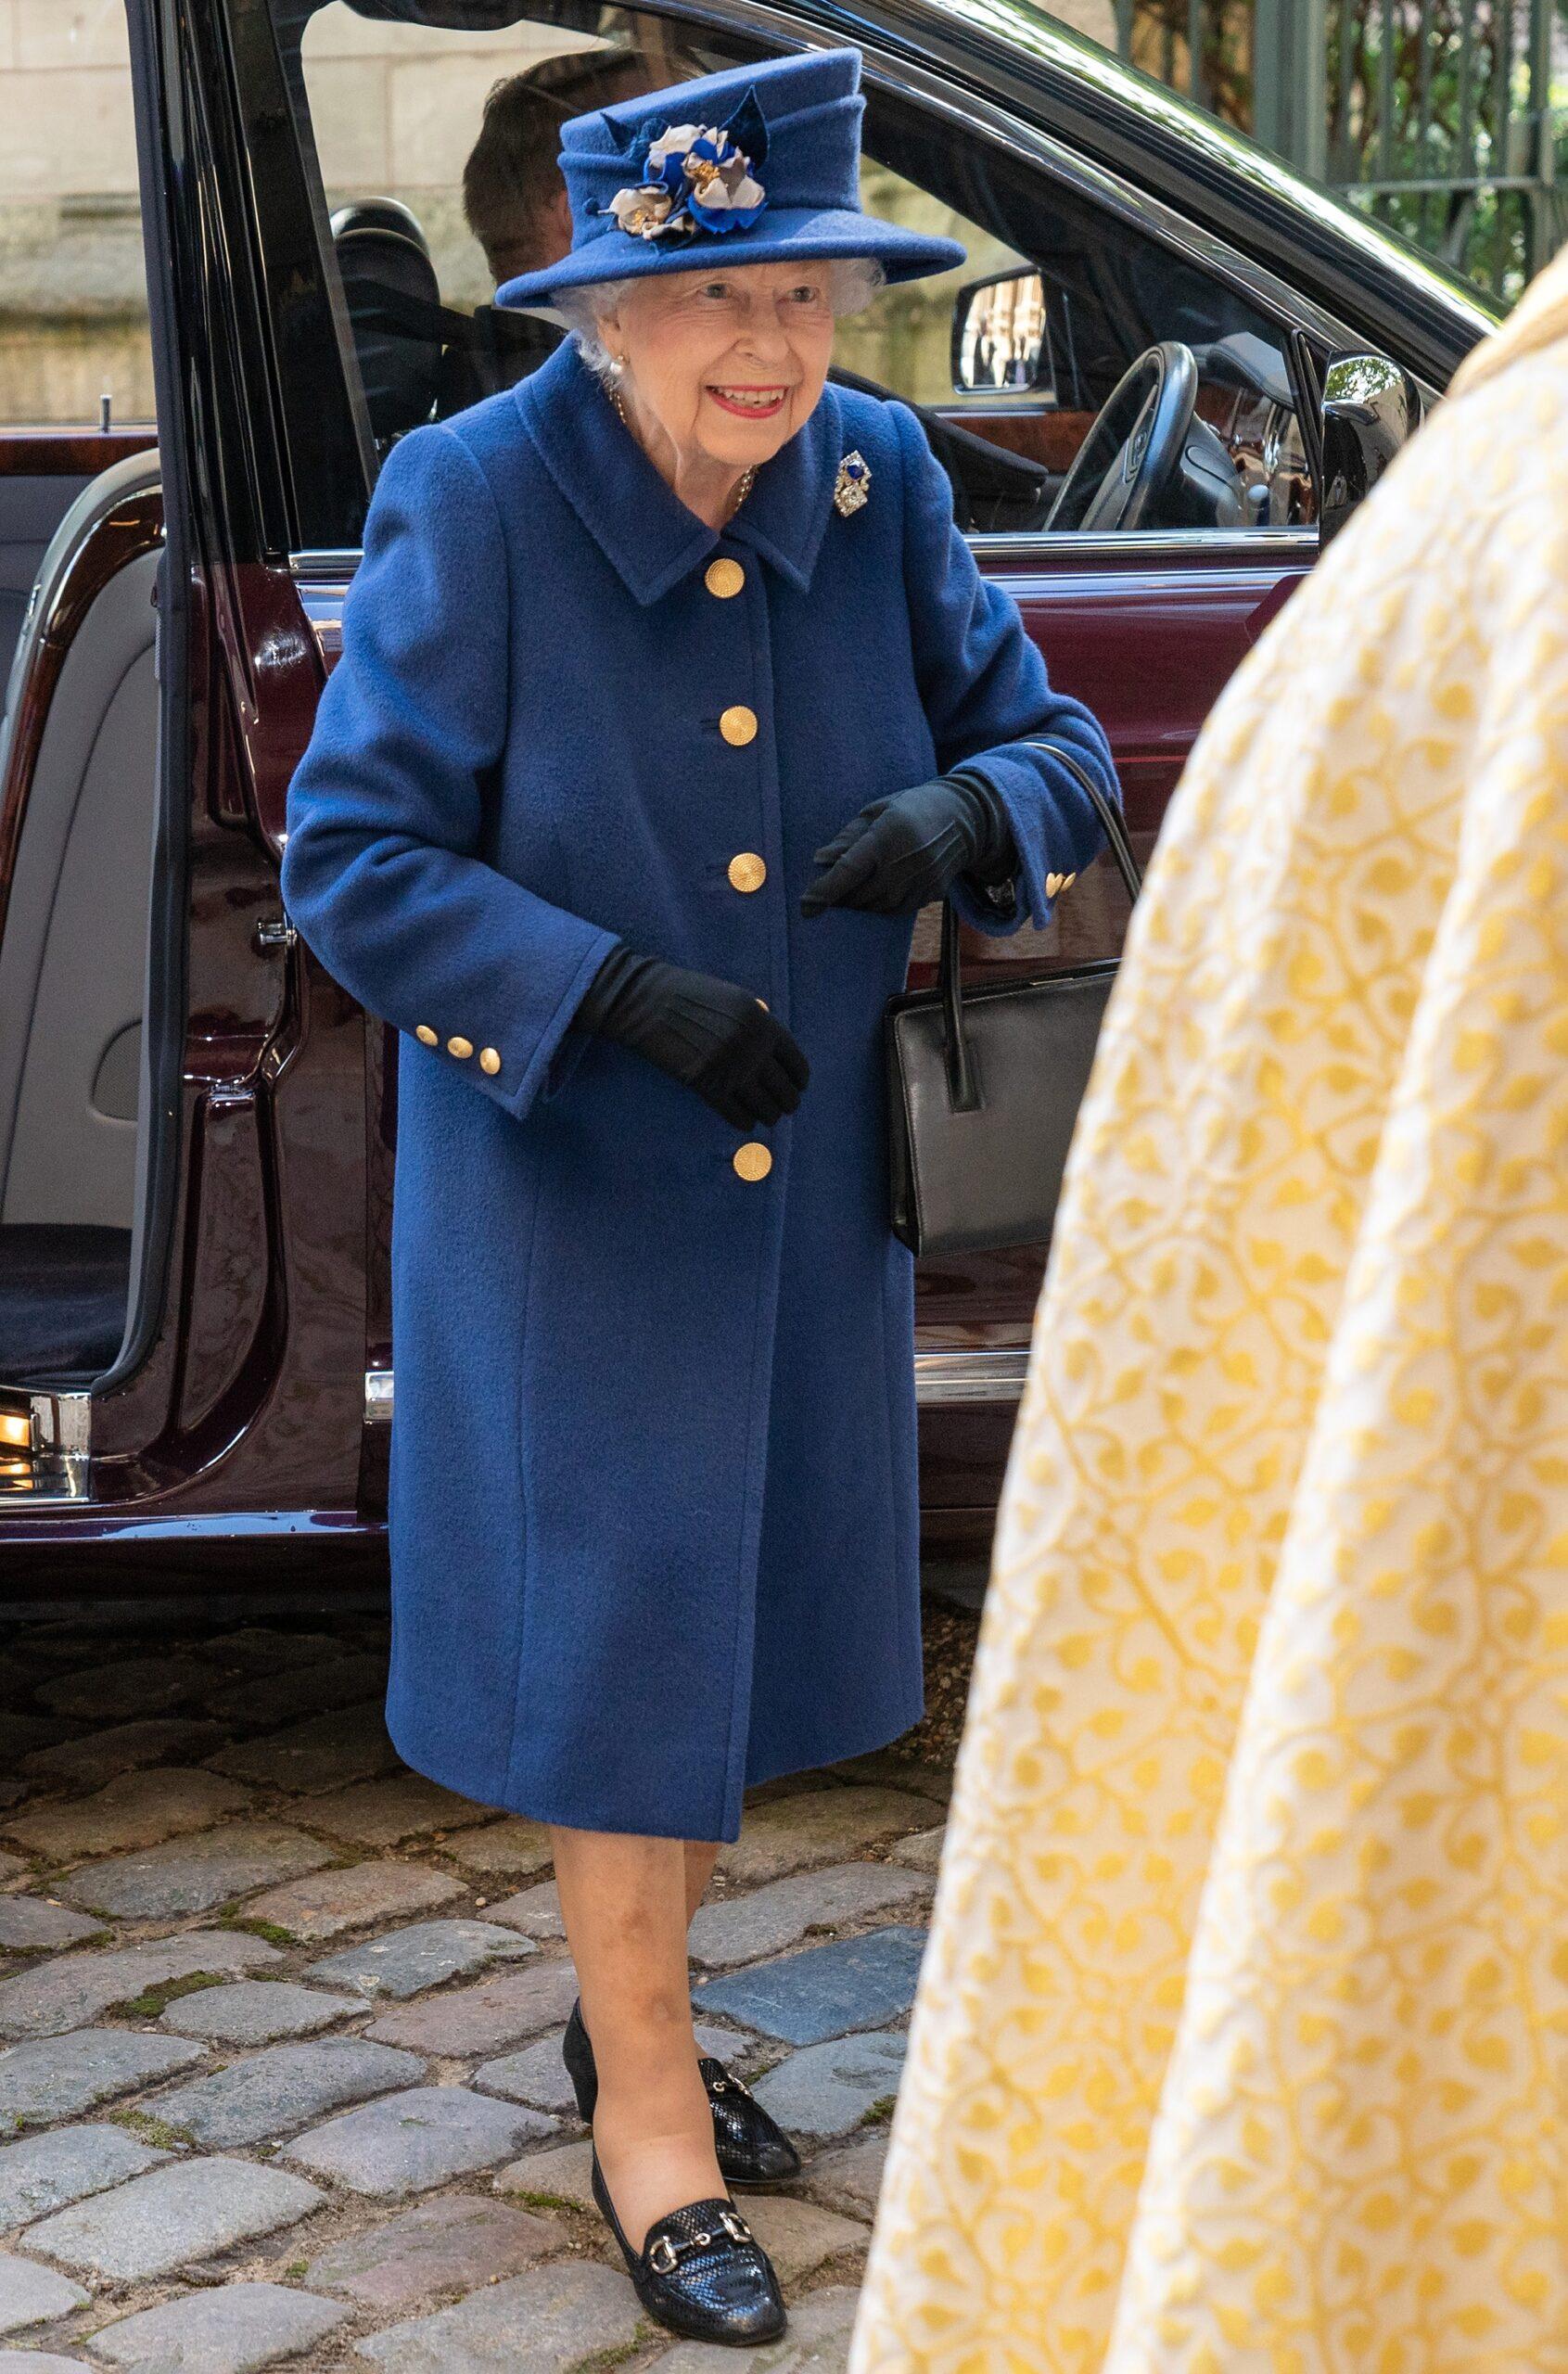 The Queen and Princess Anne attend a Service of Thanksgiving for the Royal British Legion